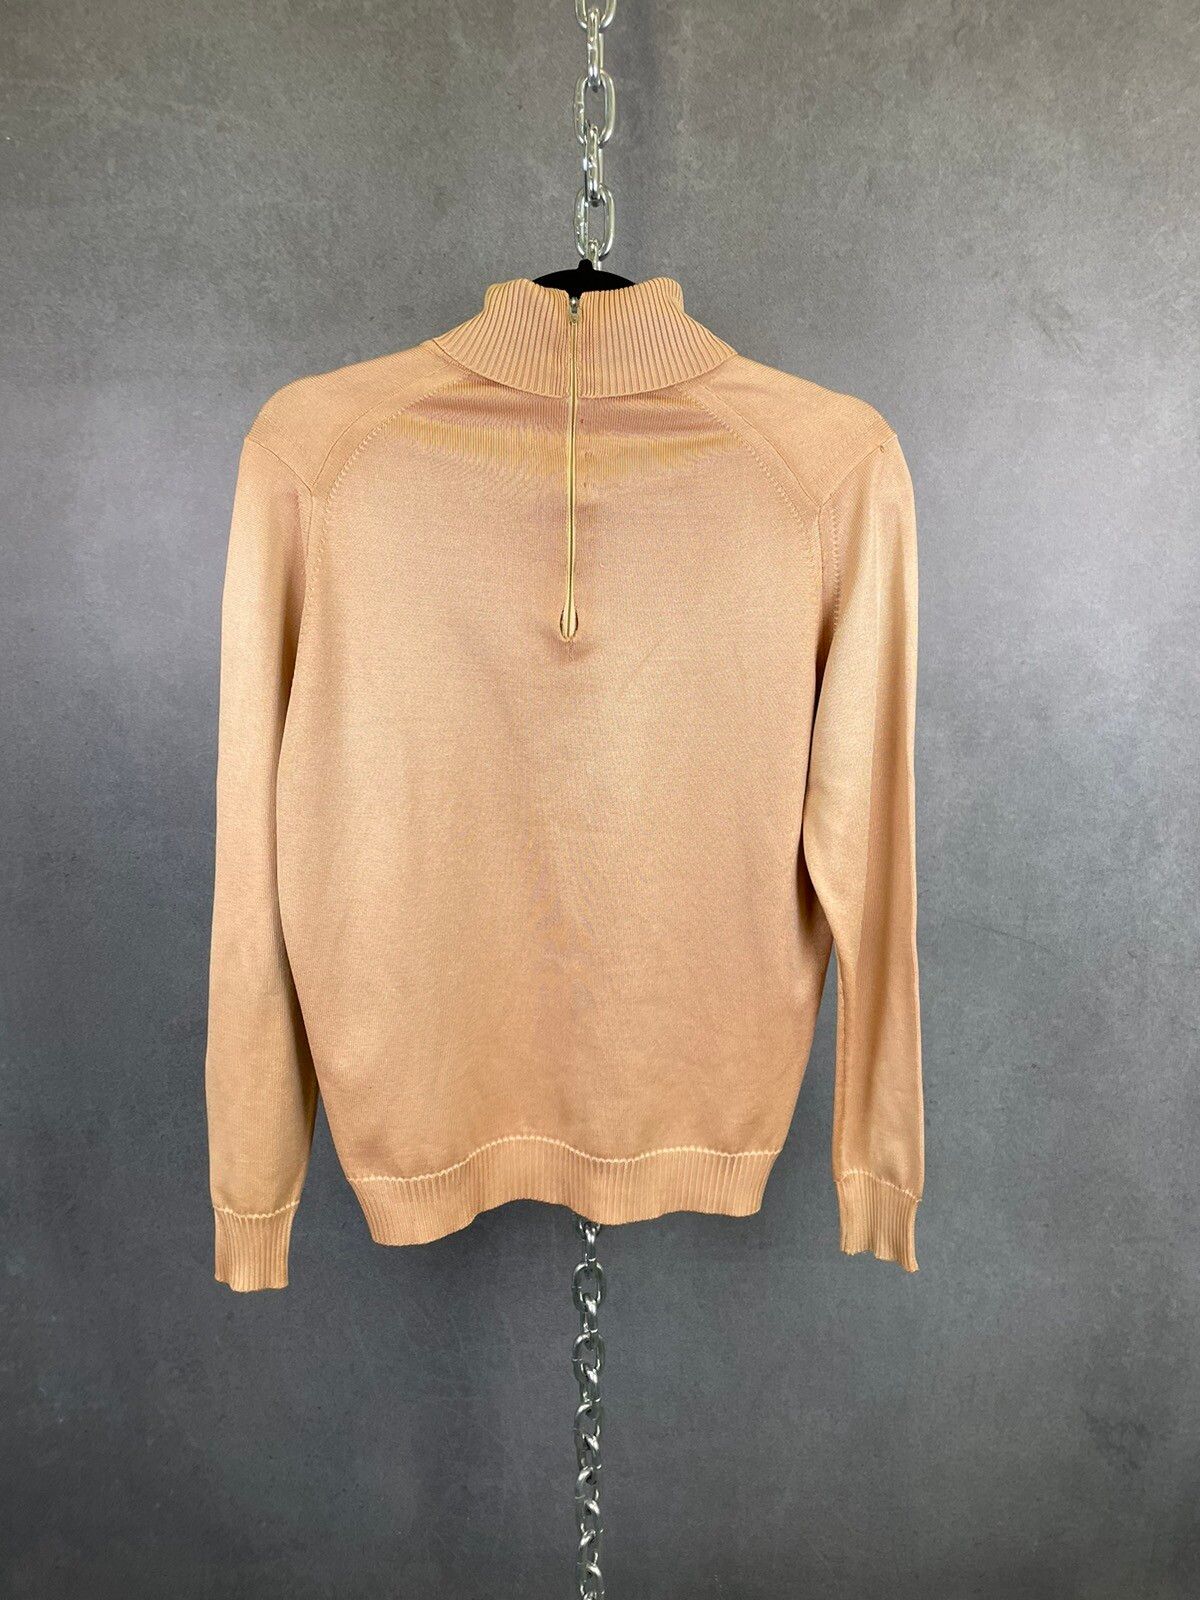 Givenchy Vintage 70s Givenchy Sport Tan Turtleneck Top Size 38 Size S / US 4 / IT 40 - 4 Thumbnail